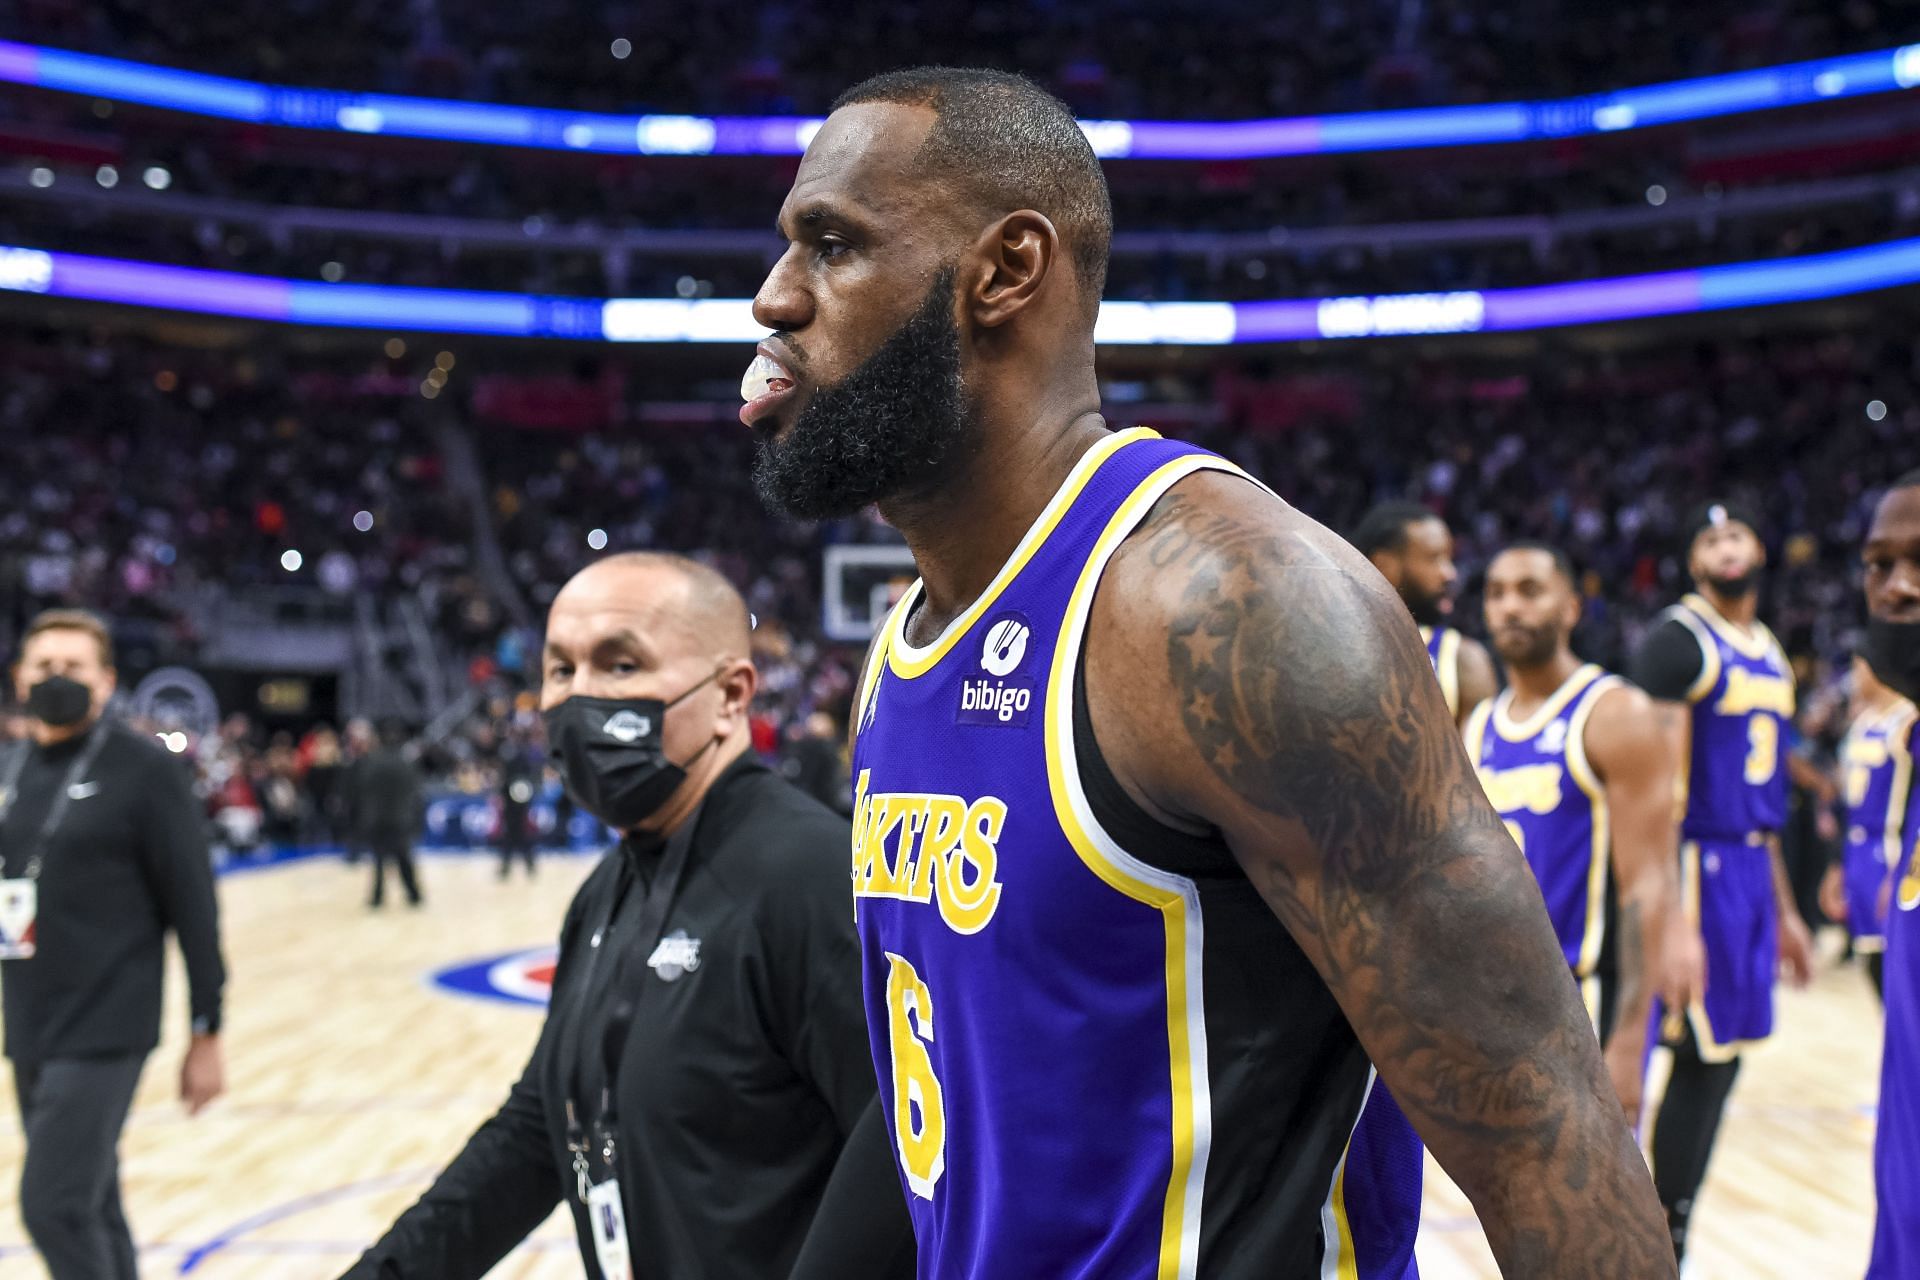 LA Lakers superstar has been hit with a suspension